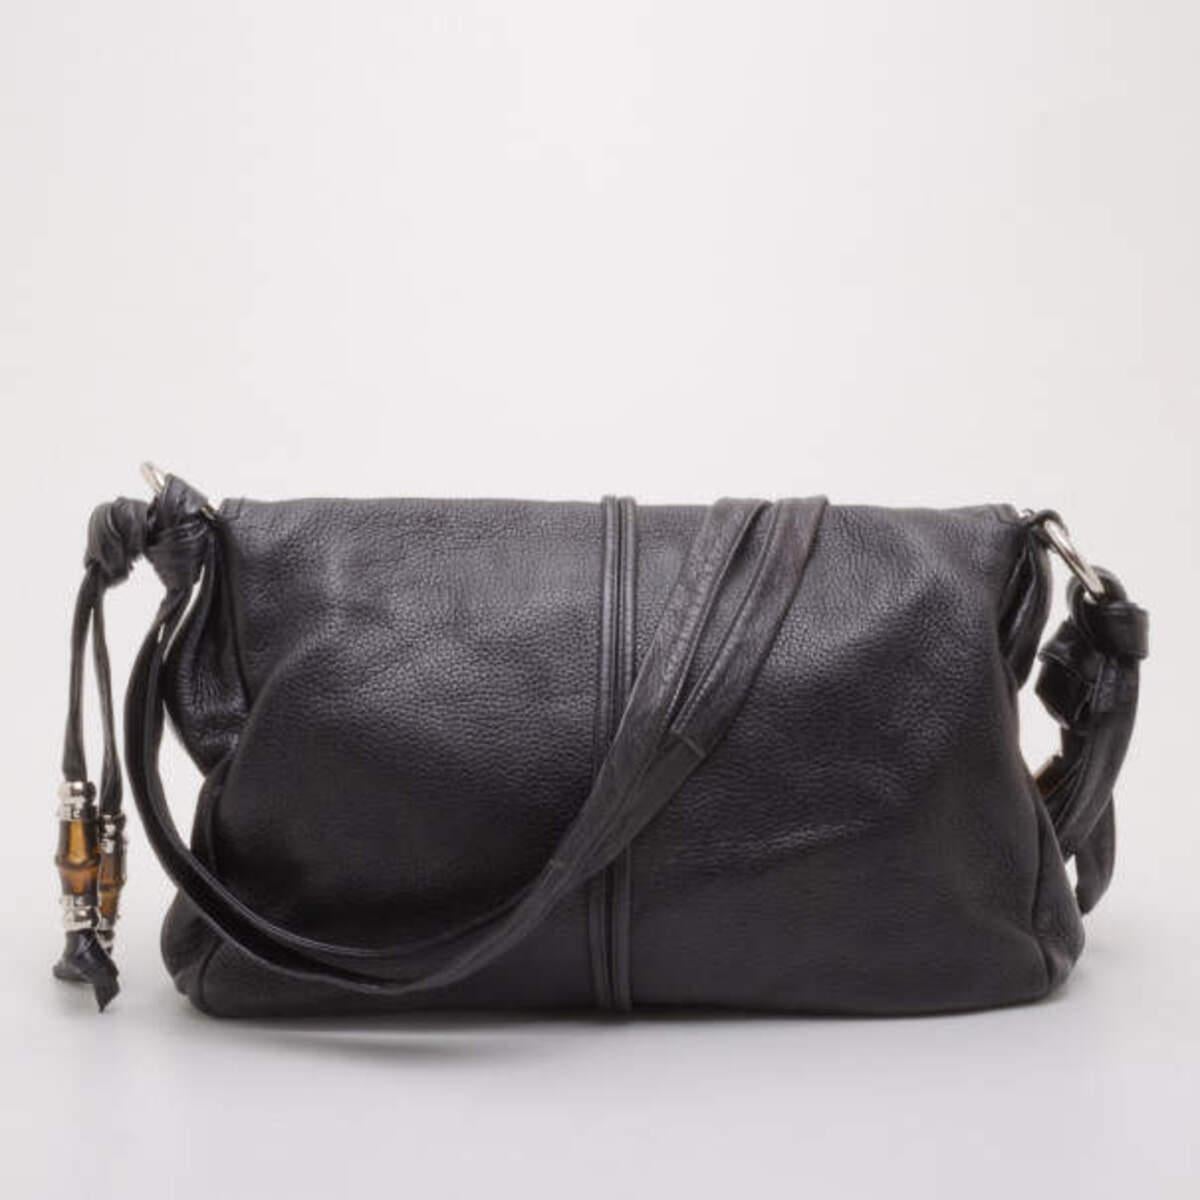 This Jungle messenger by Gucci is not your average black handbag. Crafted from supple black leather, it is accented with Gucci's signature bamboo accents, chic tassels and silver hardware. The interior is lined with Gucci monogram canvas, two